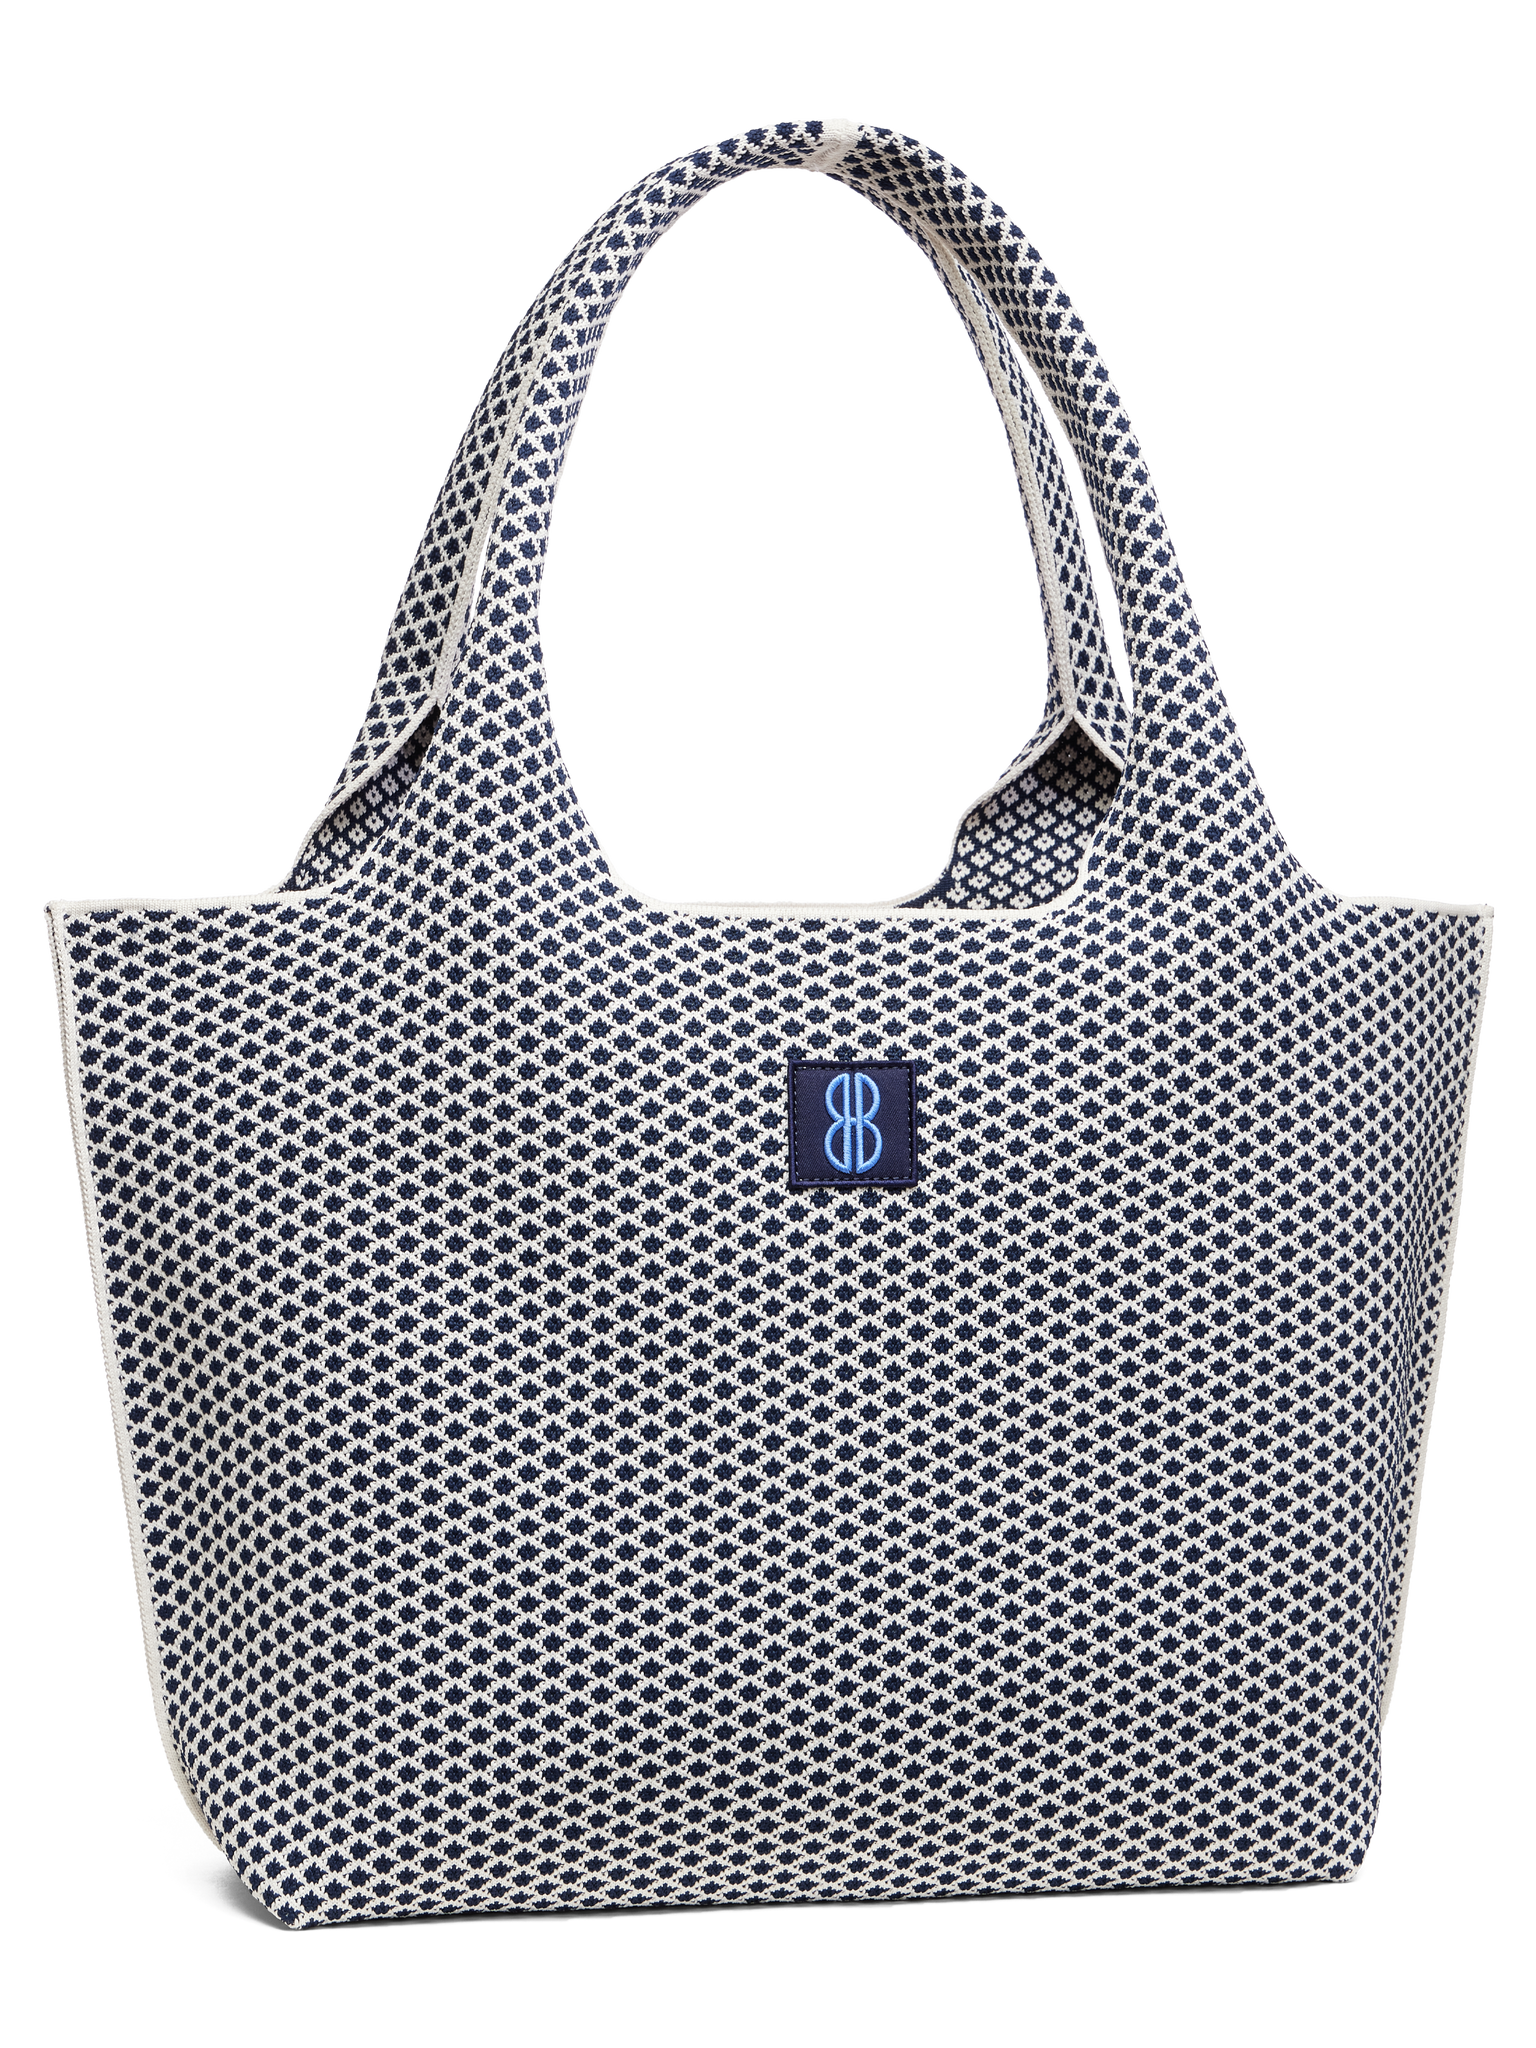 Large - Navy Diamond tote with pouch